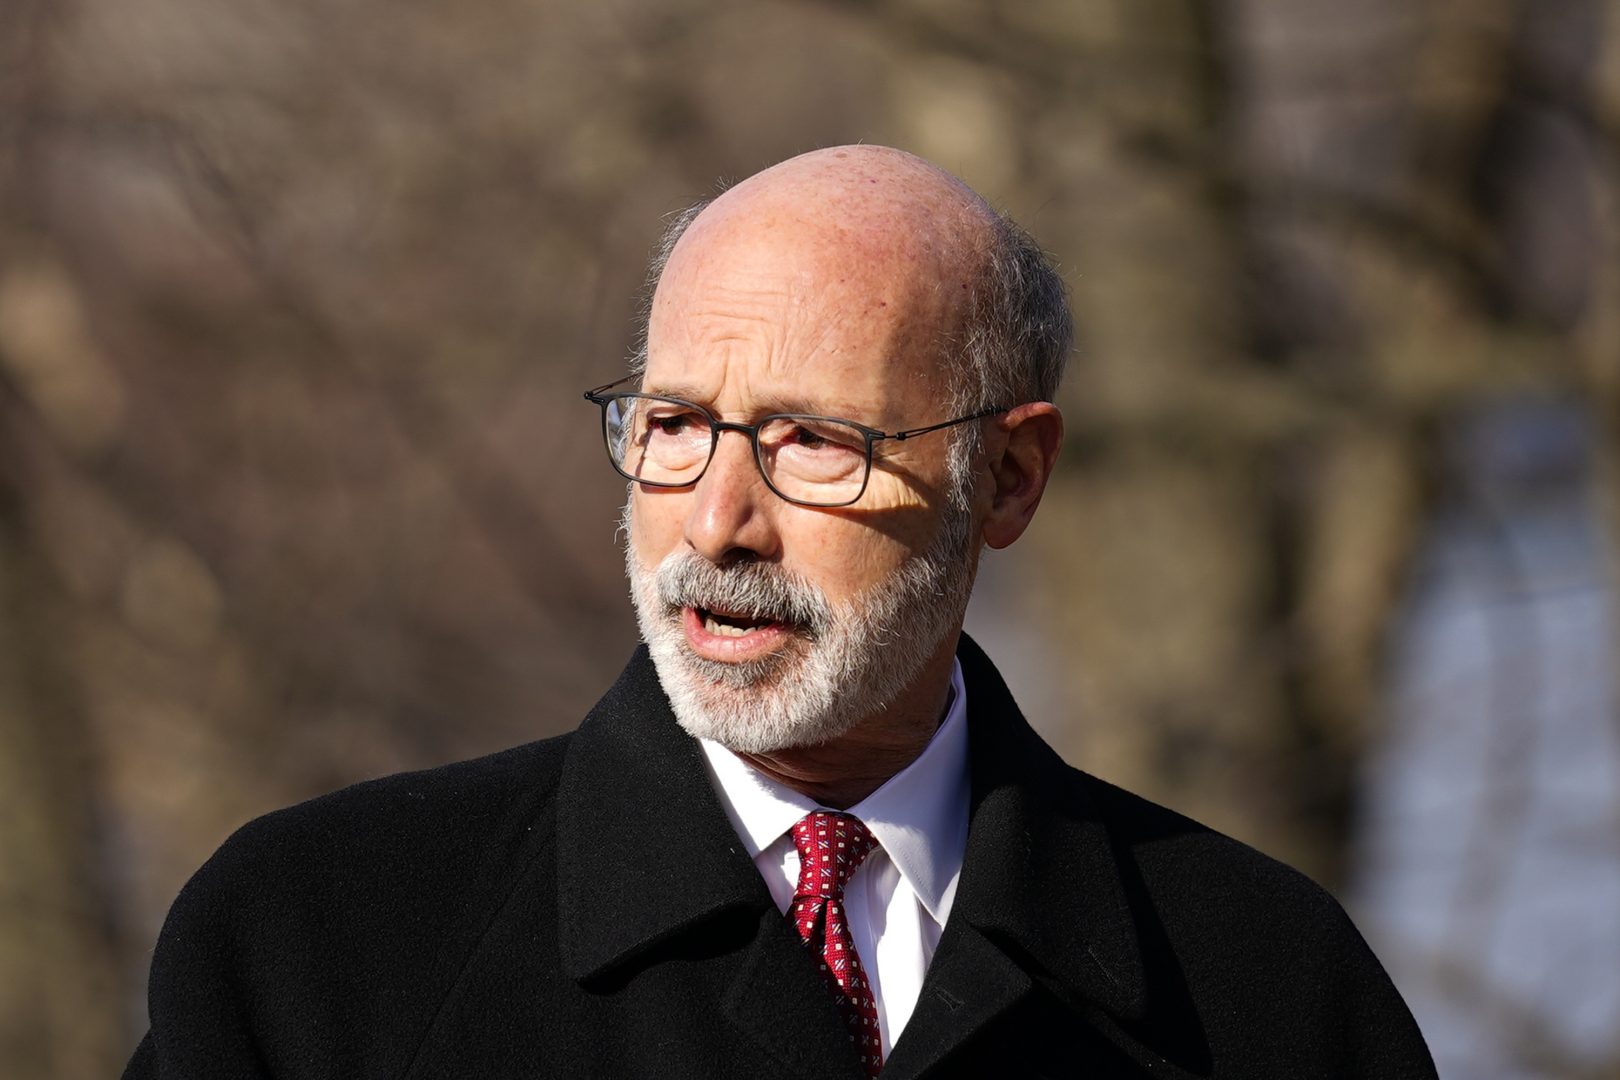 Gov. Tom Wolf speaks during a news conference in Philadelphia, in this file photo from Jan. 14, 2022.  